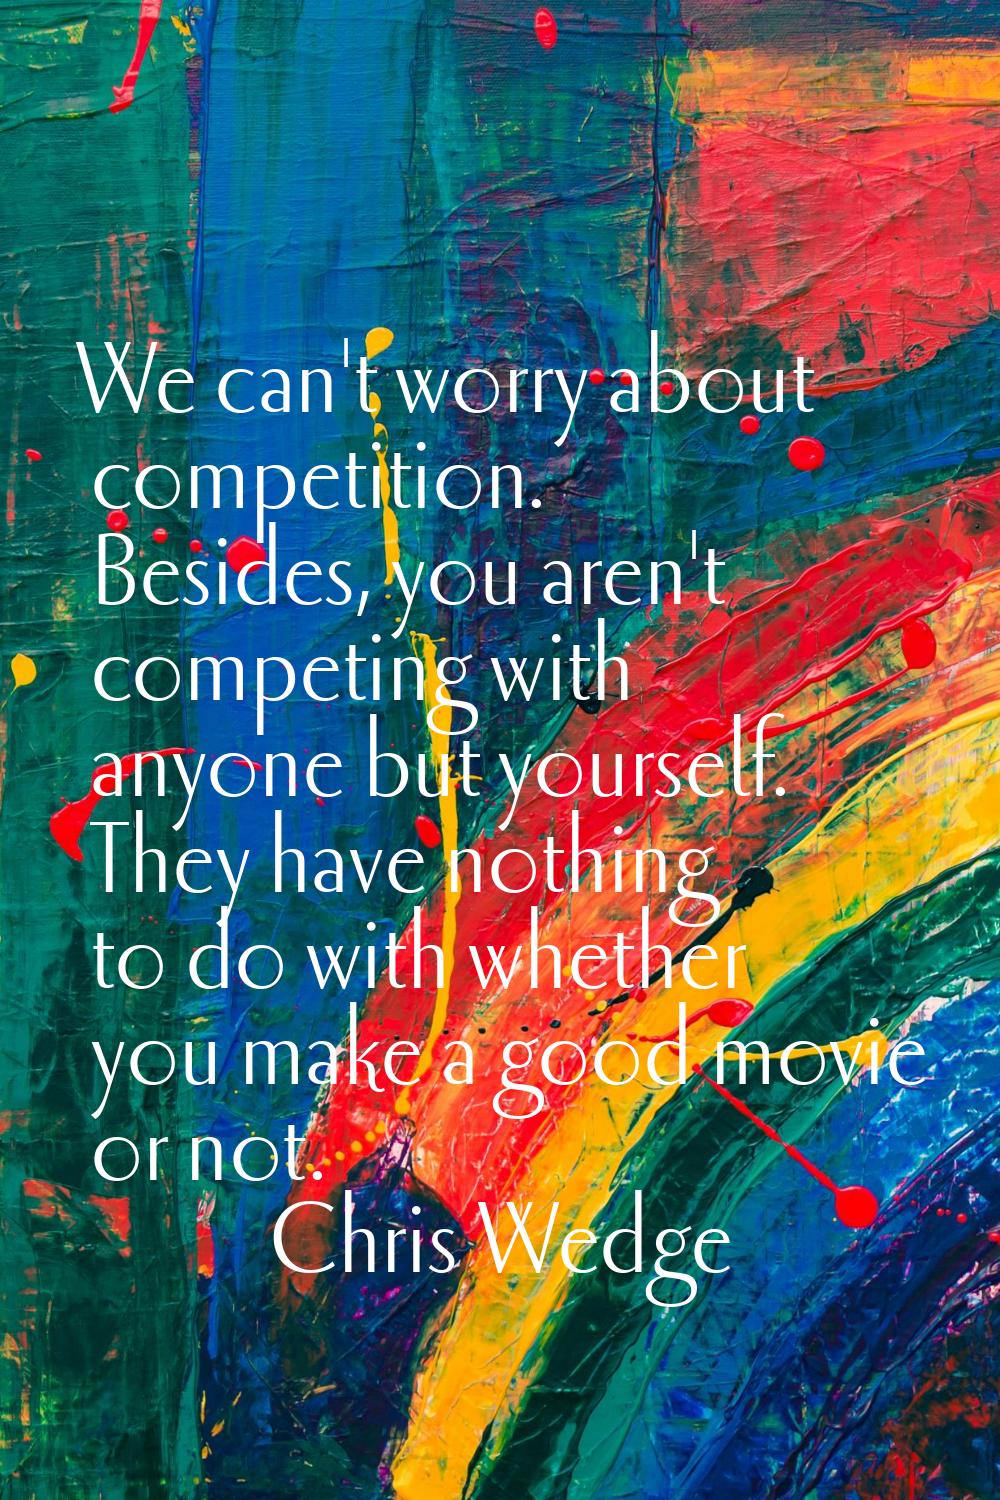 We can't worry about competition. Besides, you aren't competing with anyone but yourself. They have